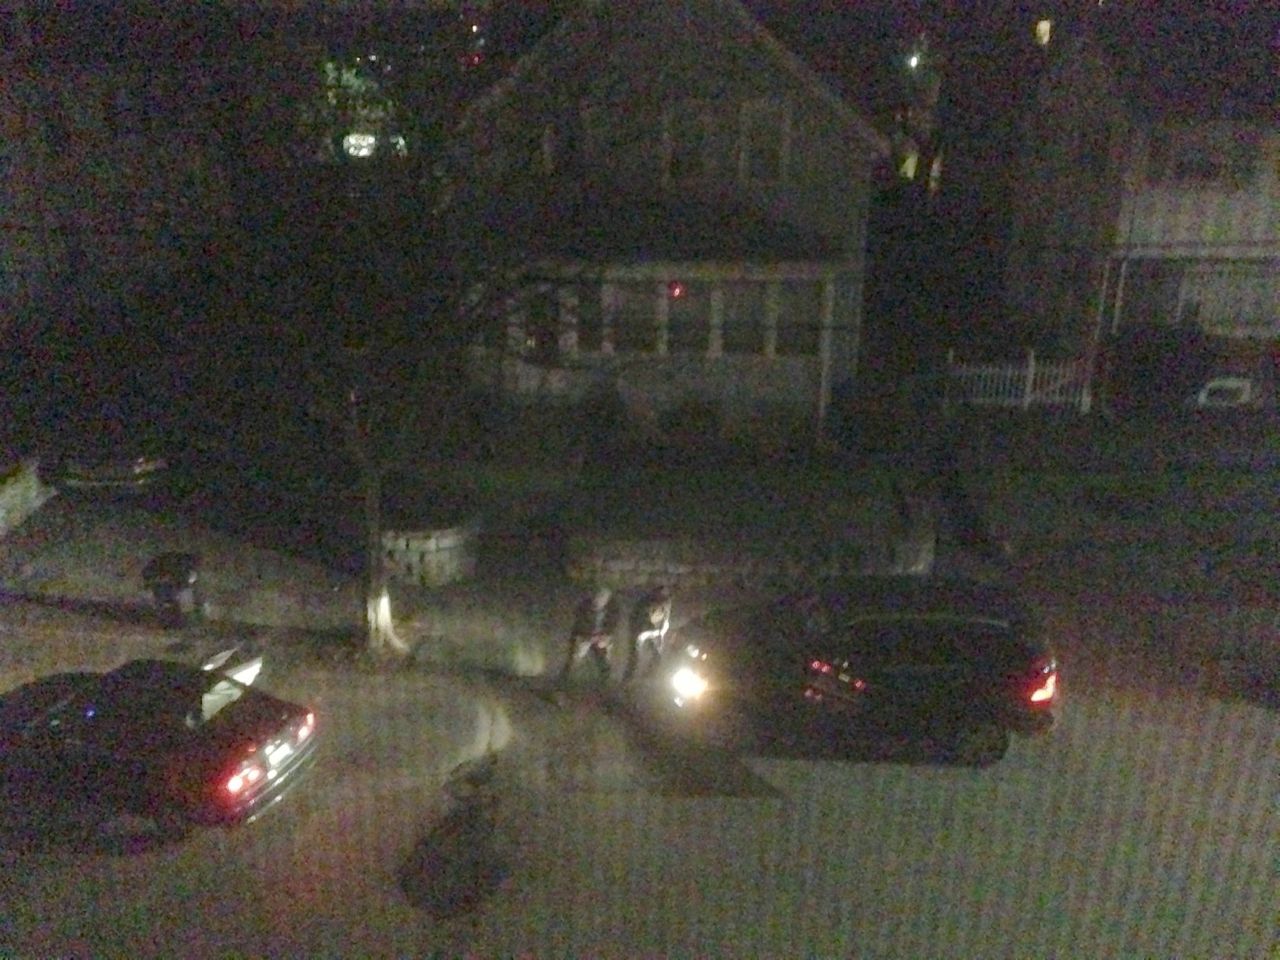 Photos of the Watertown shootout were entered into evidence. Neighbors came to their windows and then retreated. One grabbed his infant son and headed toward the back of his house with his wife. Another grabbed a camera and took photographs from an upstairs window.